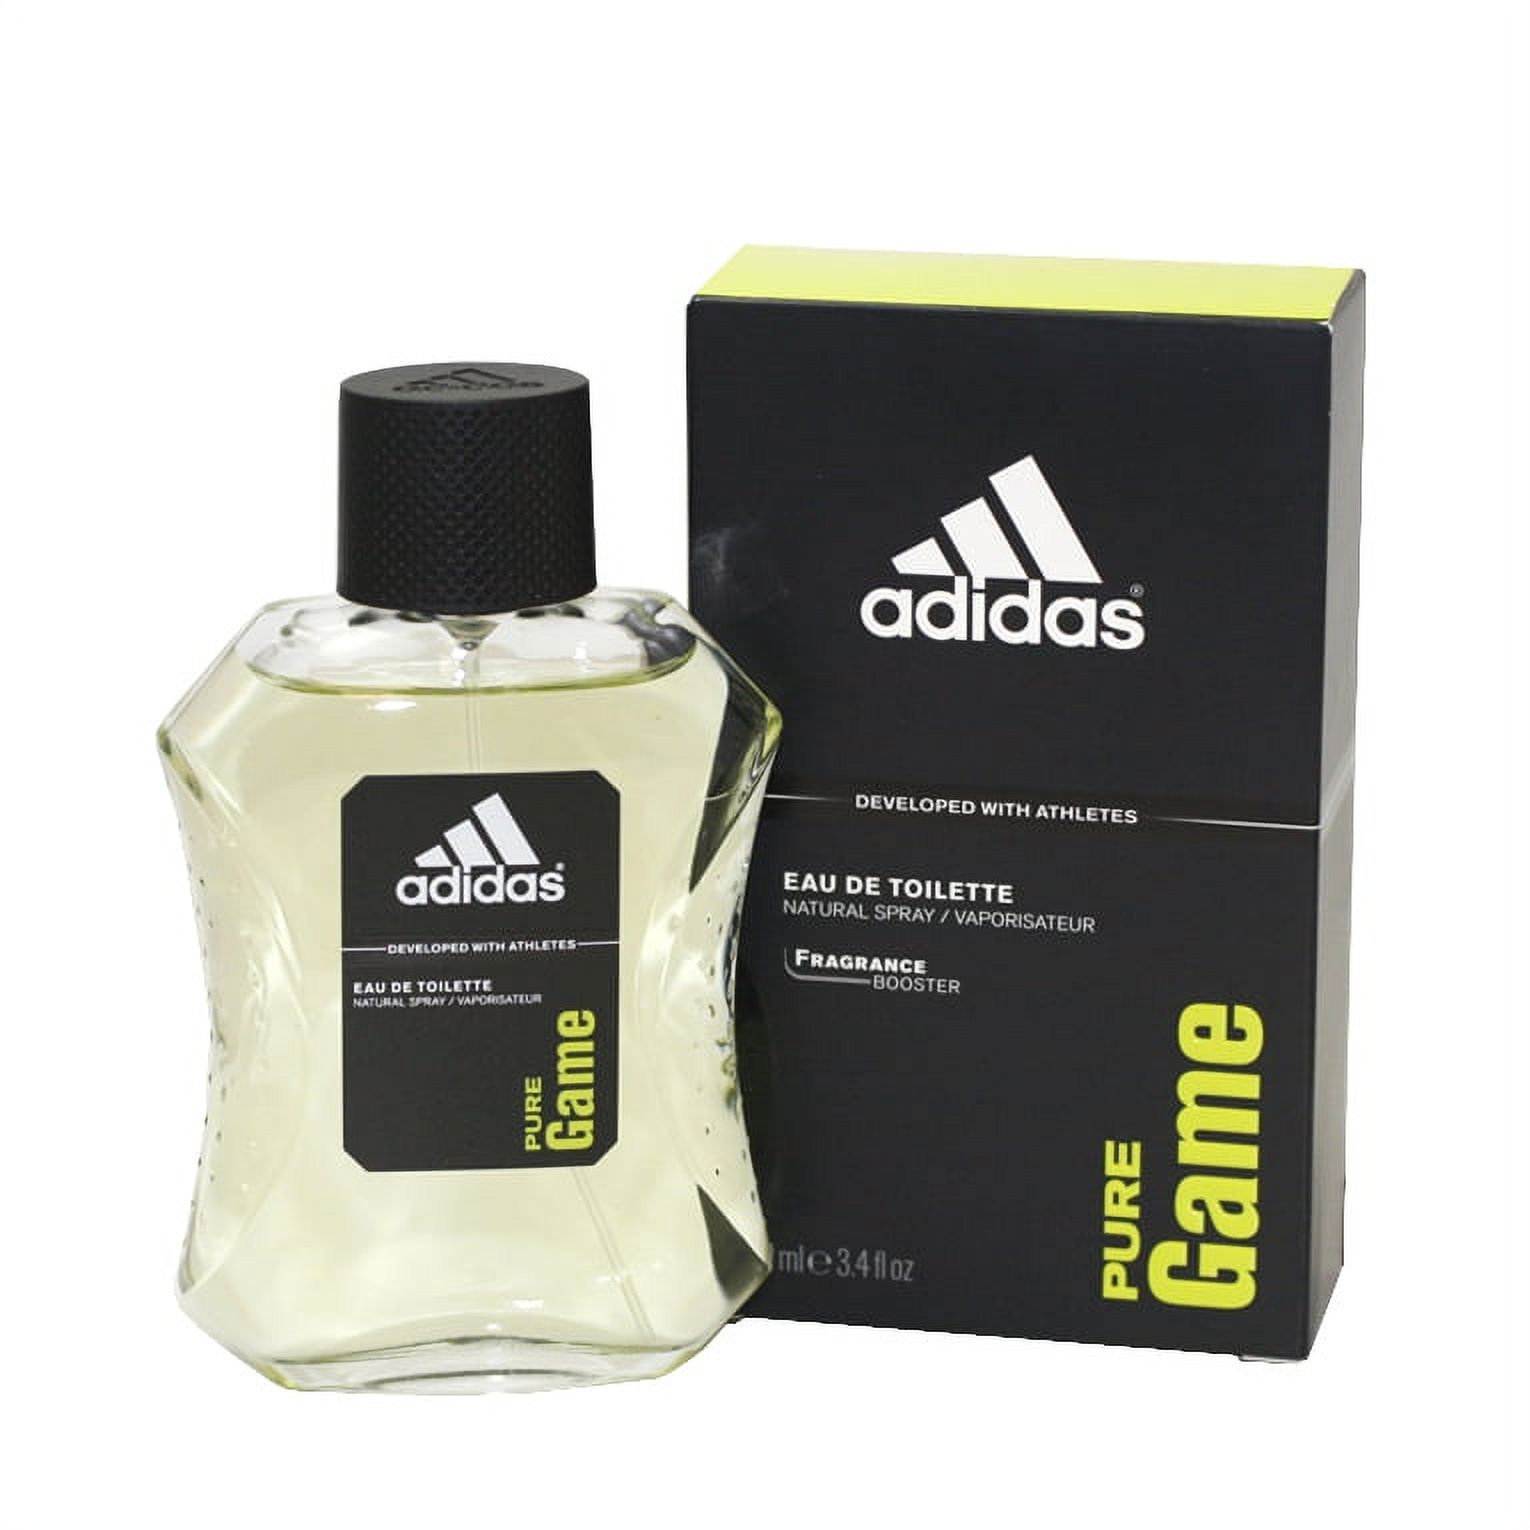 Adidas Pure Game by Adidas for Men - 3.4 oz EDT Spray - image 1 of 2